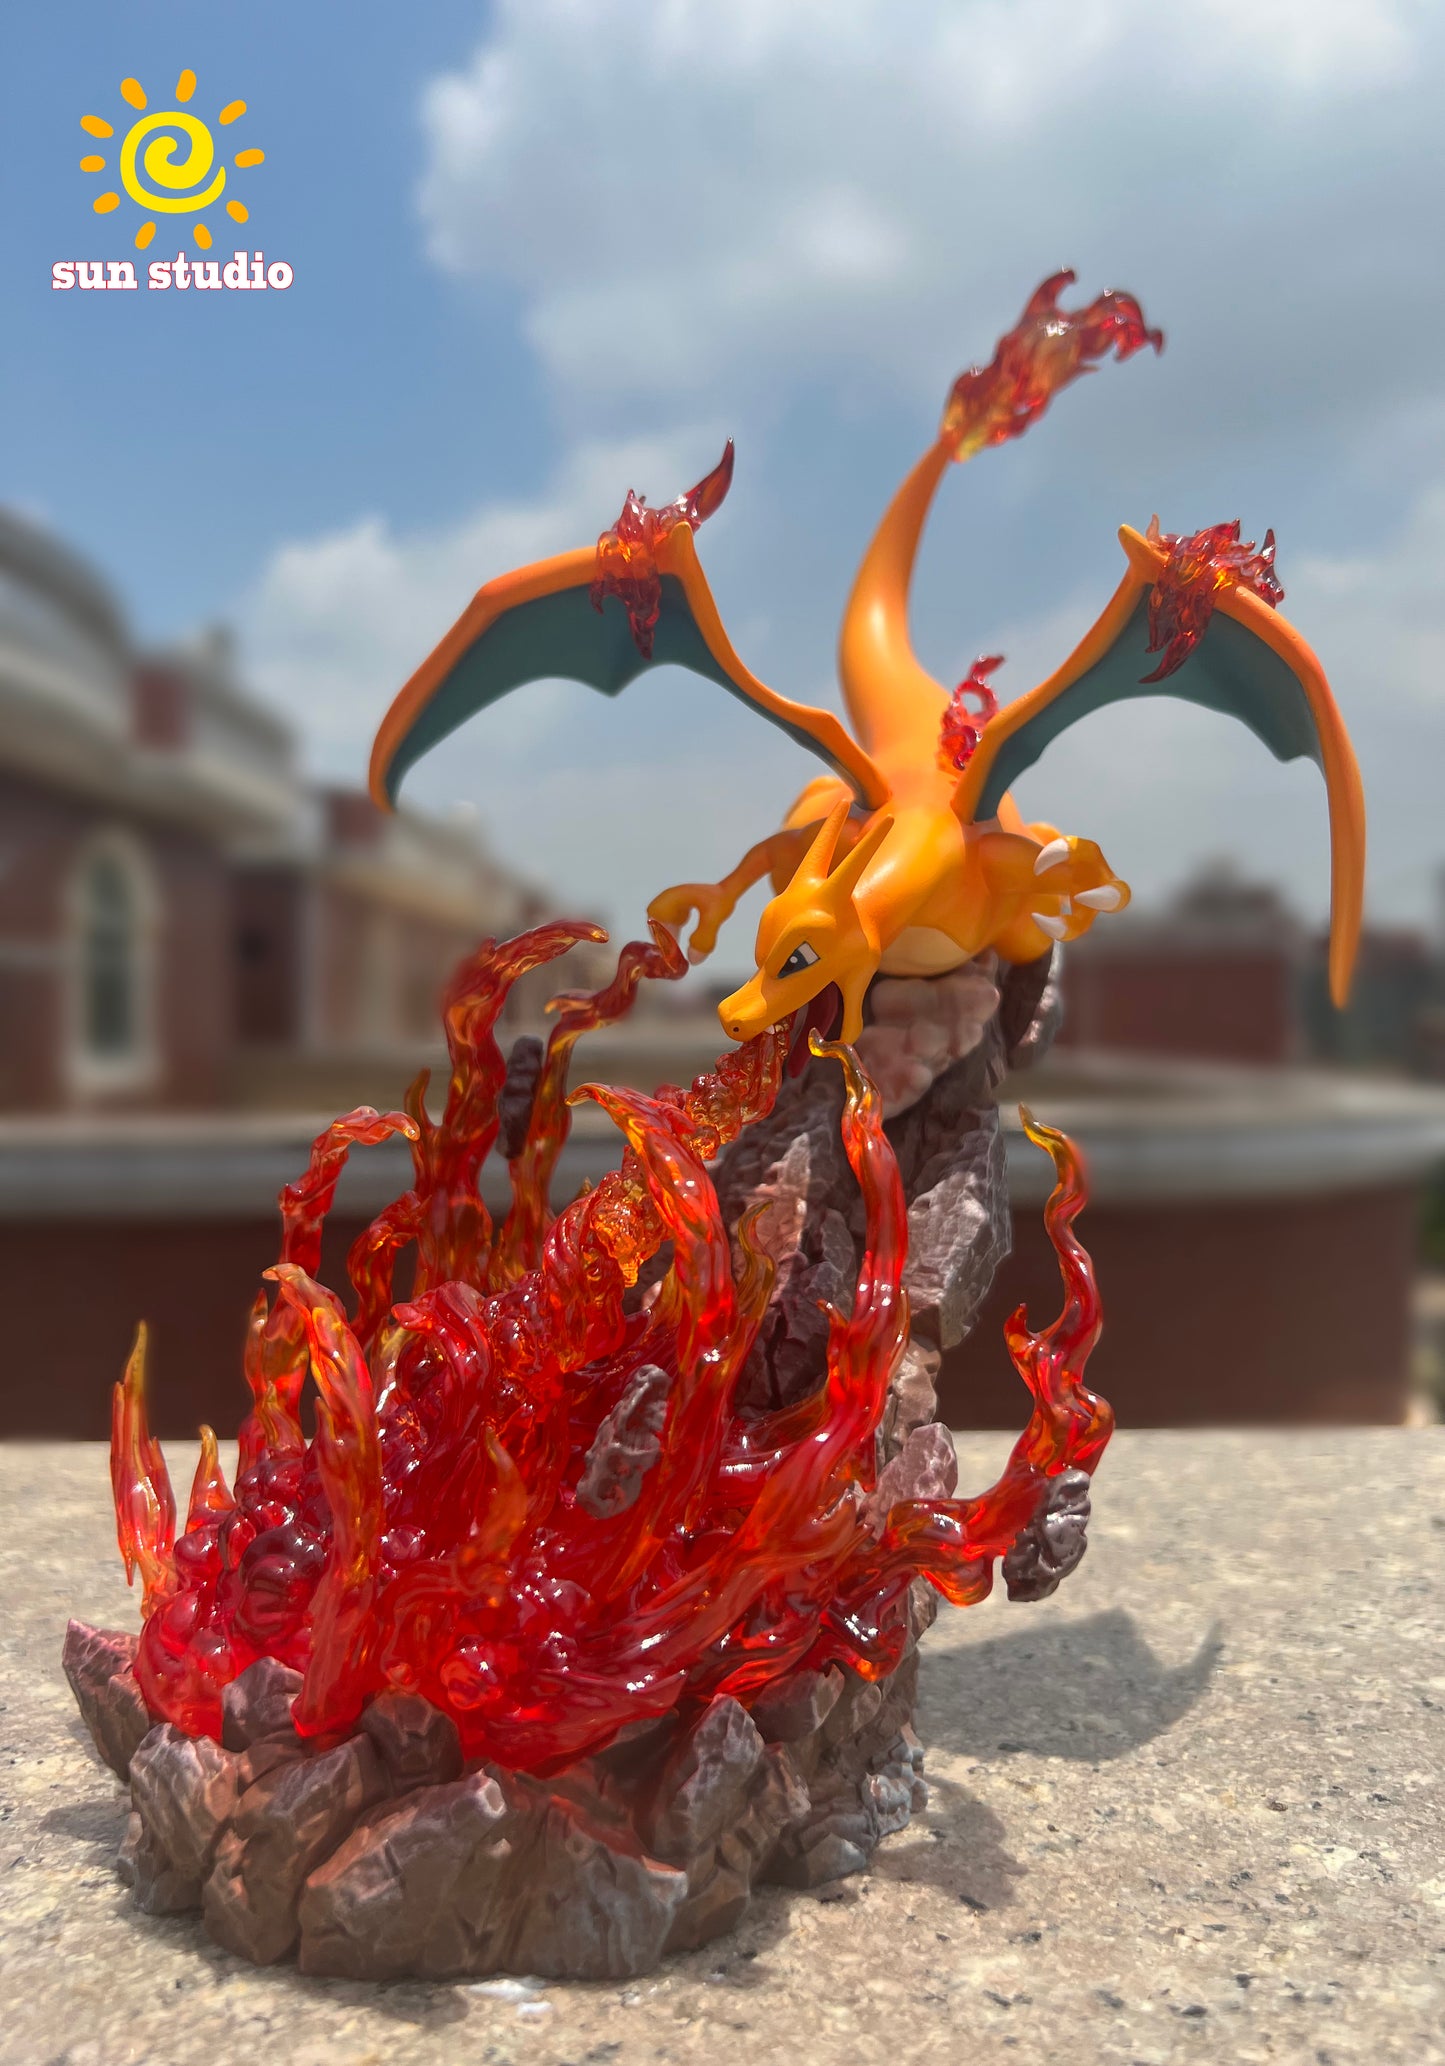 [PREORDER] 1/20 Scale World Figure [SUN] - Charizard with Flames